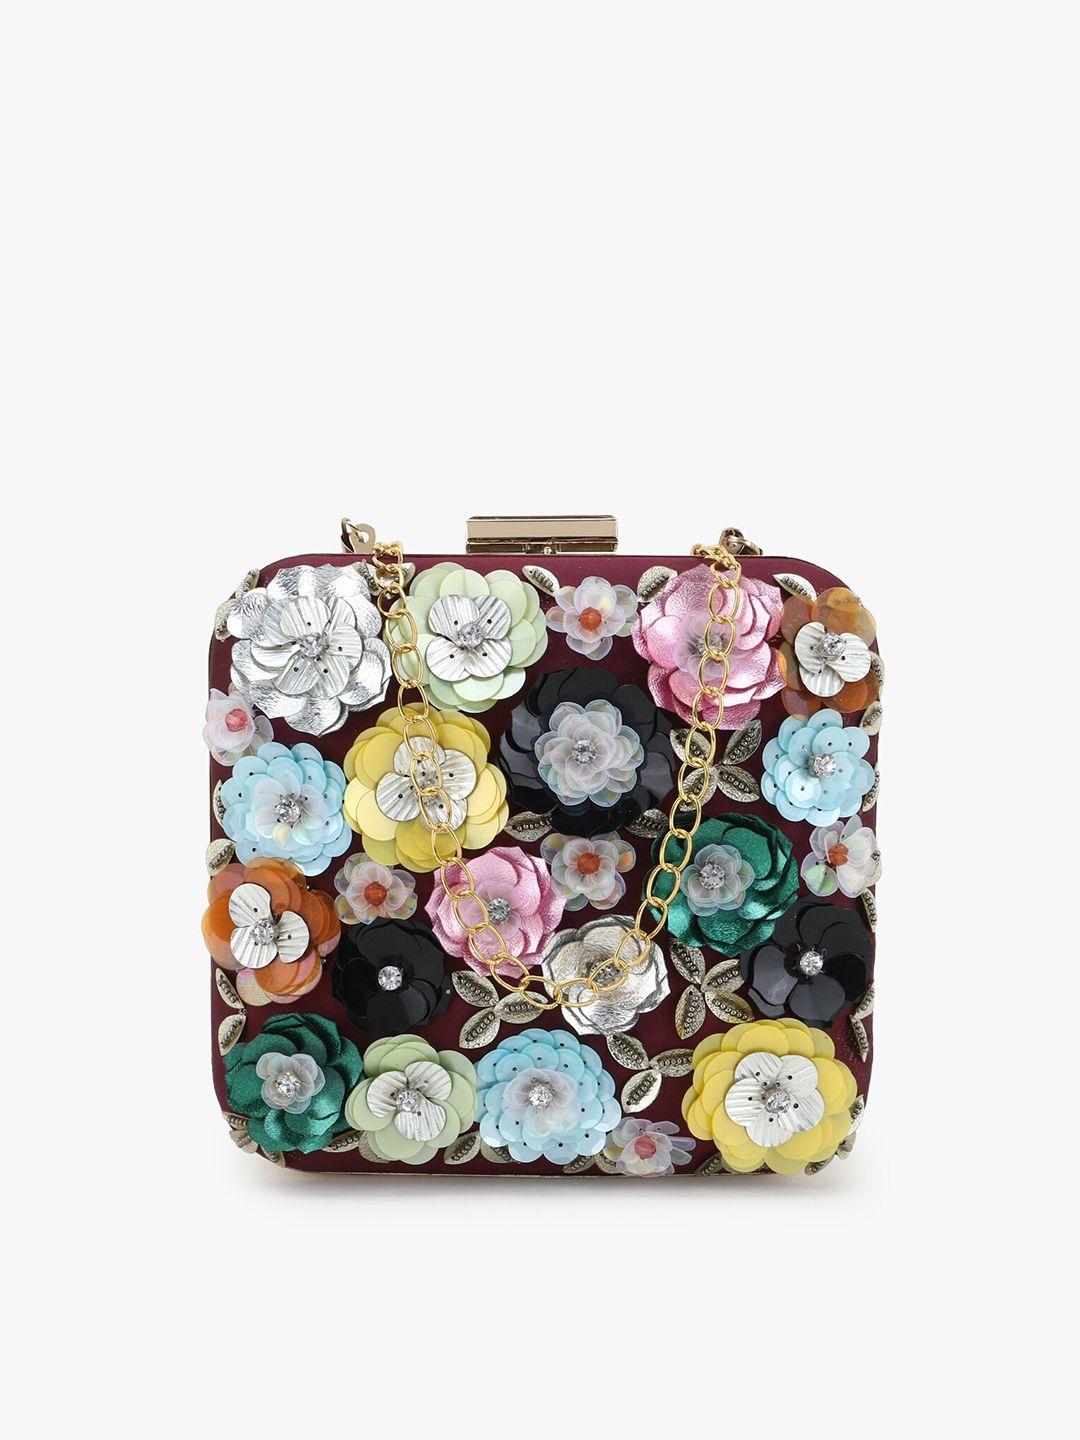 anekaant red & blue floral embellished box clutch